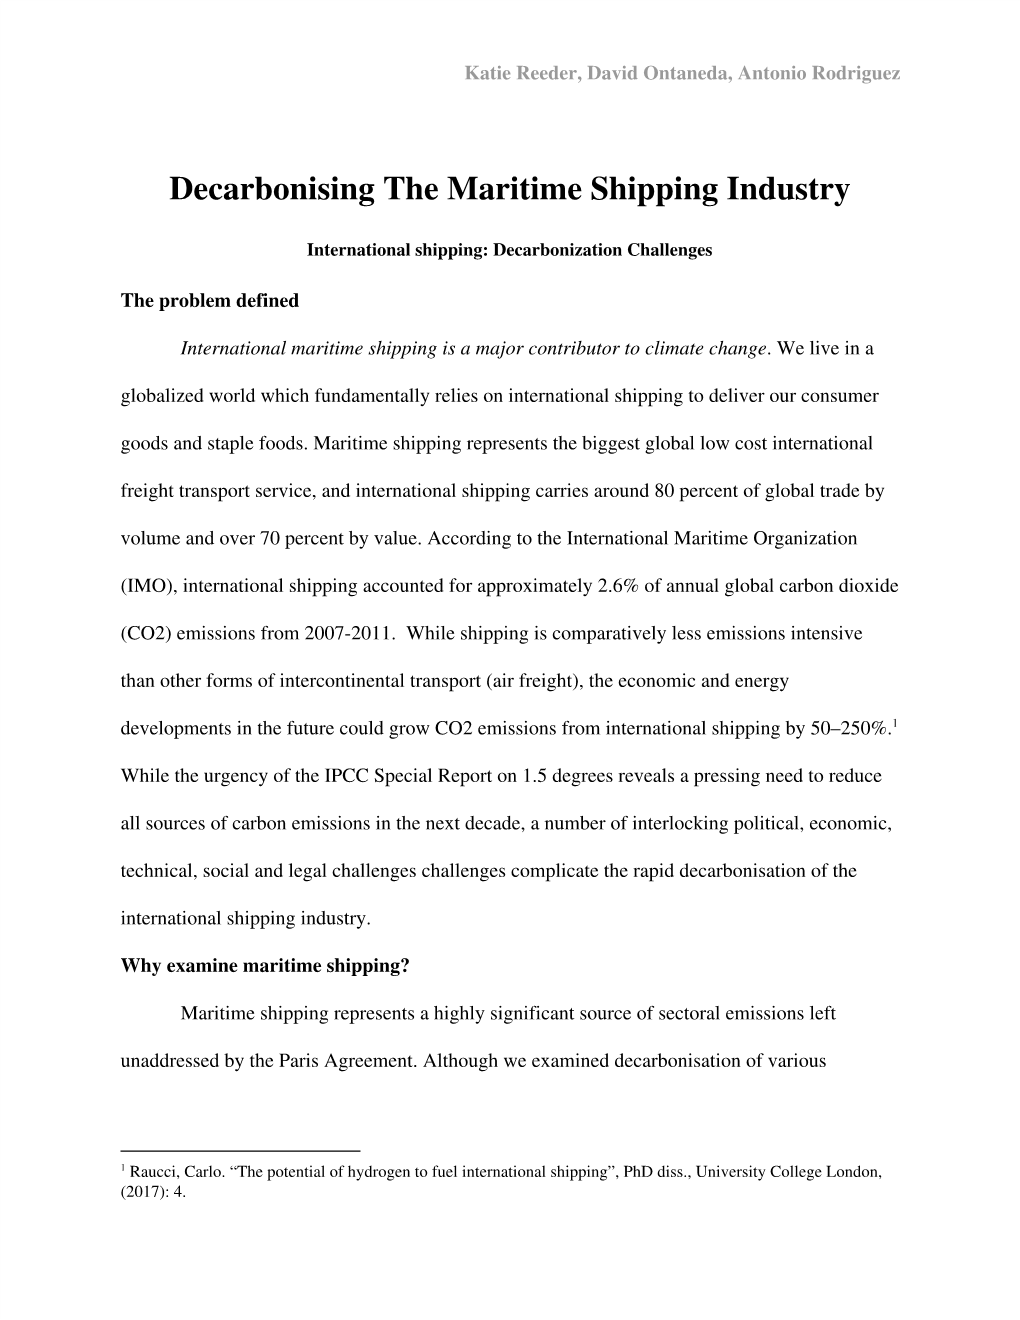 Decarbonising the Maritime Shipping Industry